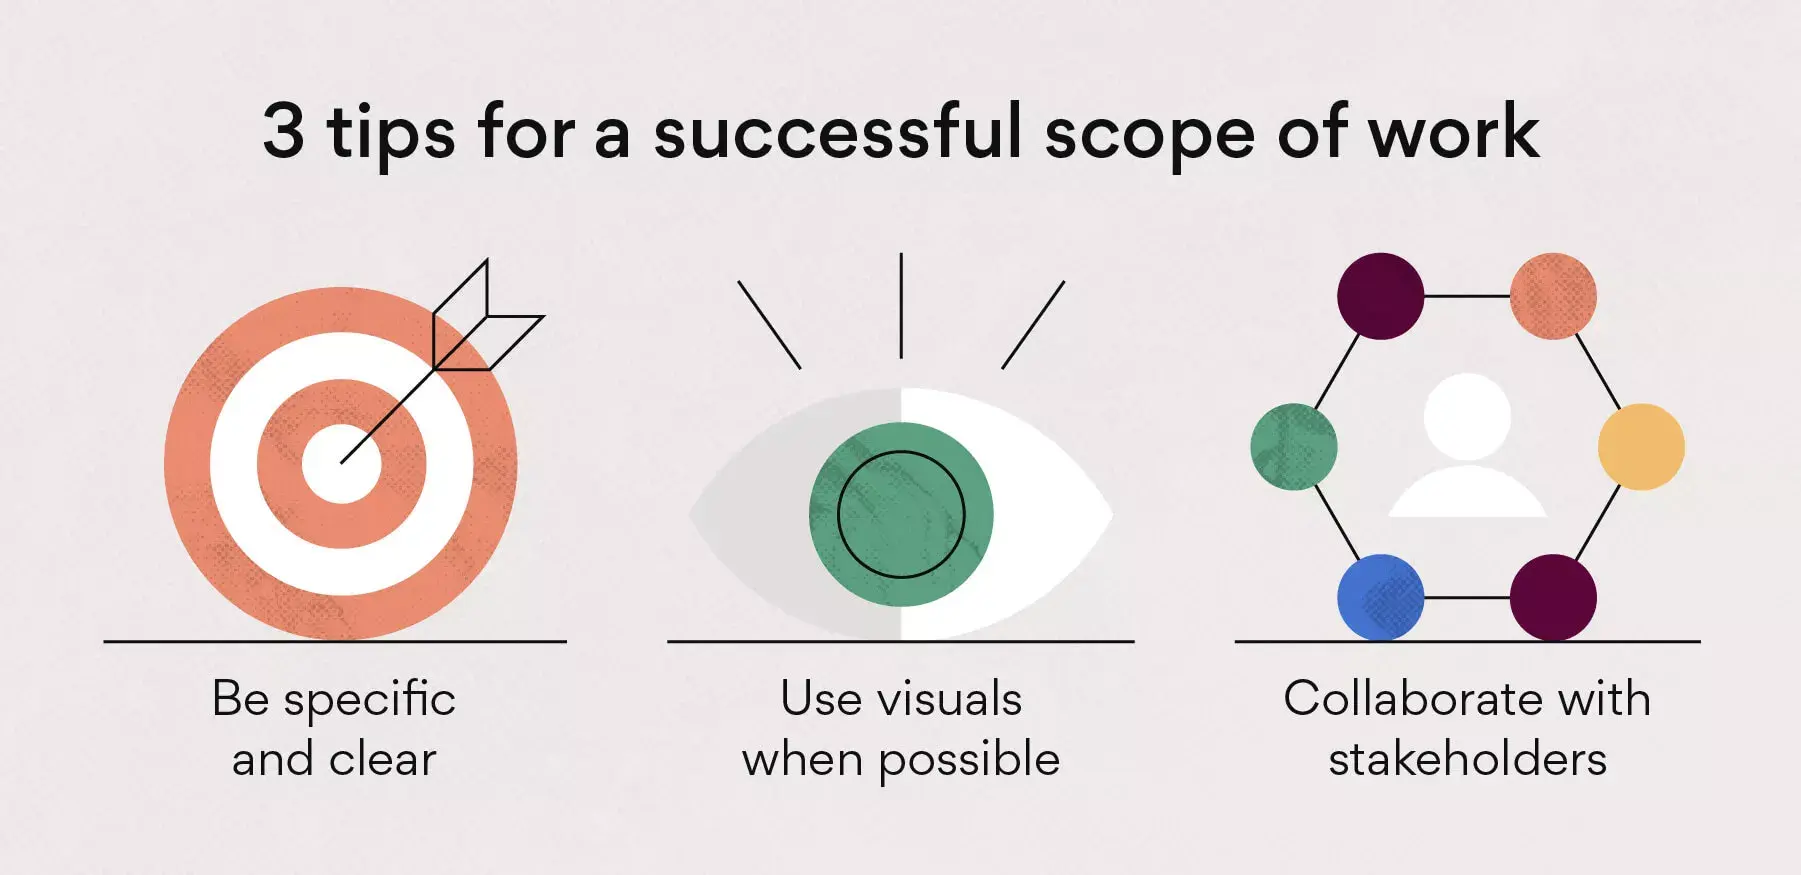 [inline illustration] How to write a scope of work (infographic)